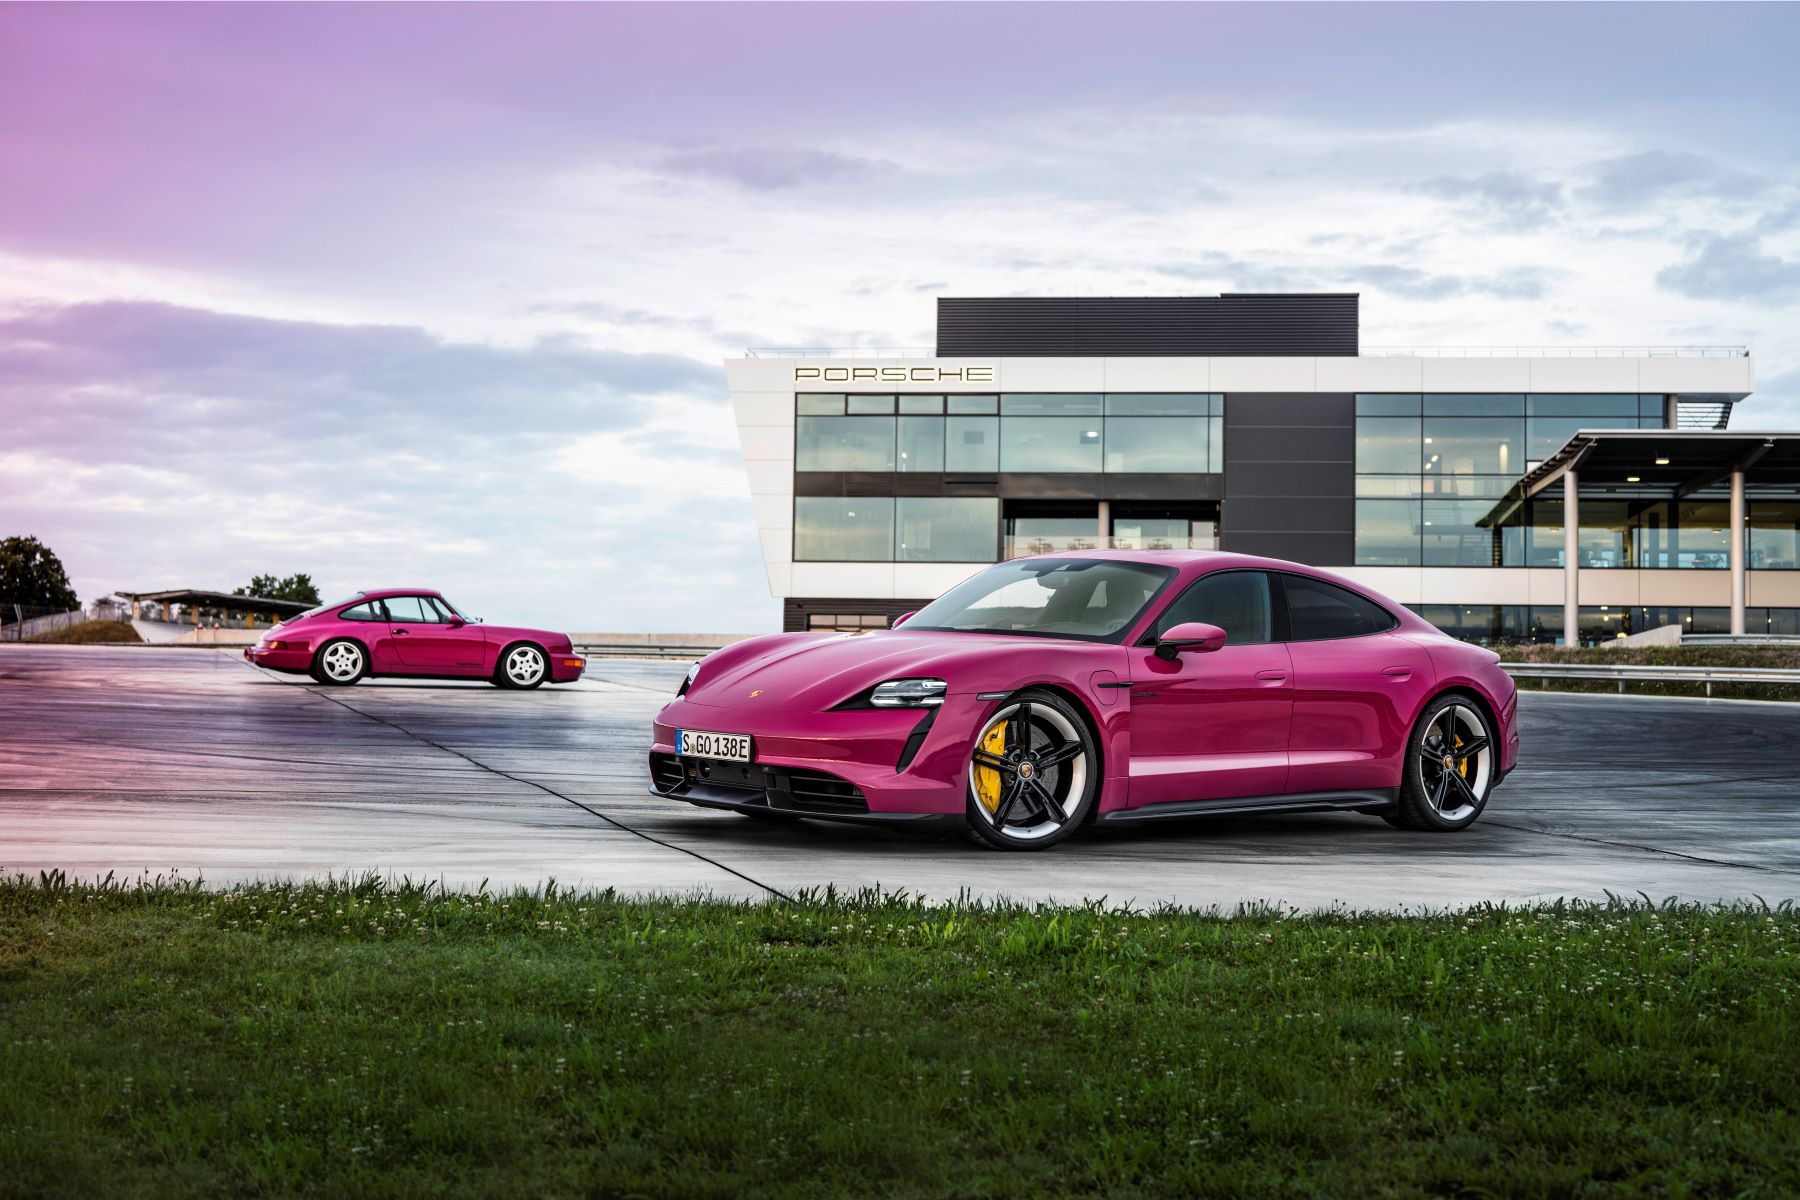 The all-electric 2022 Porsche Taycan Turbo S in pink